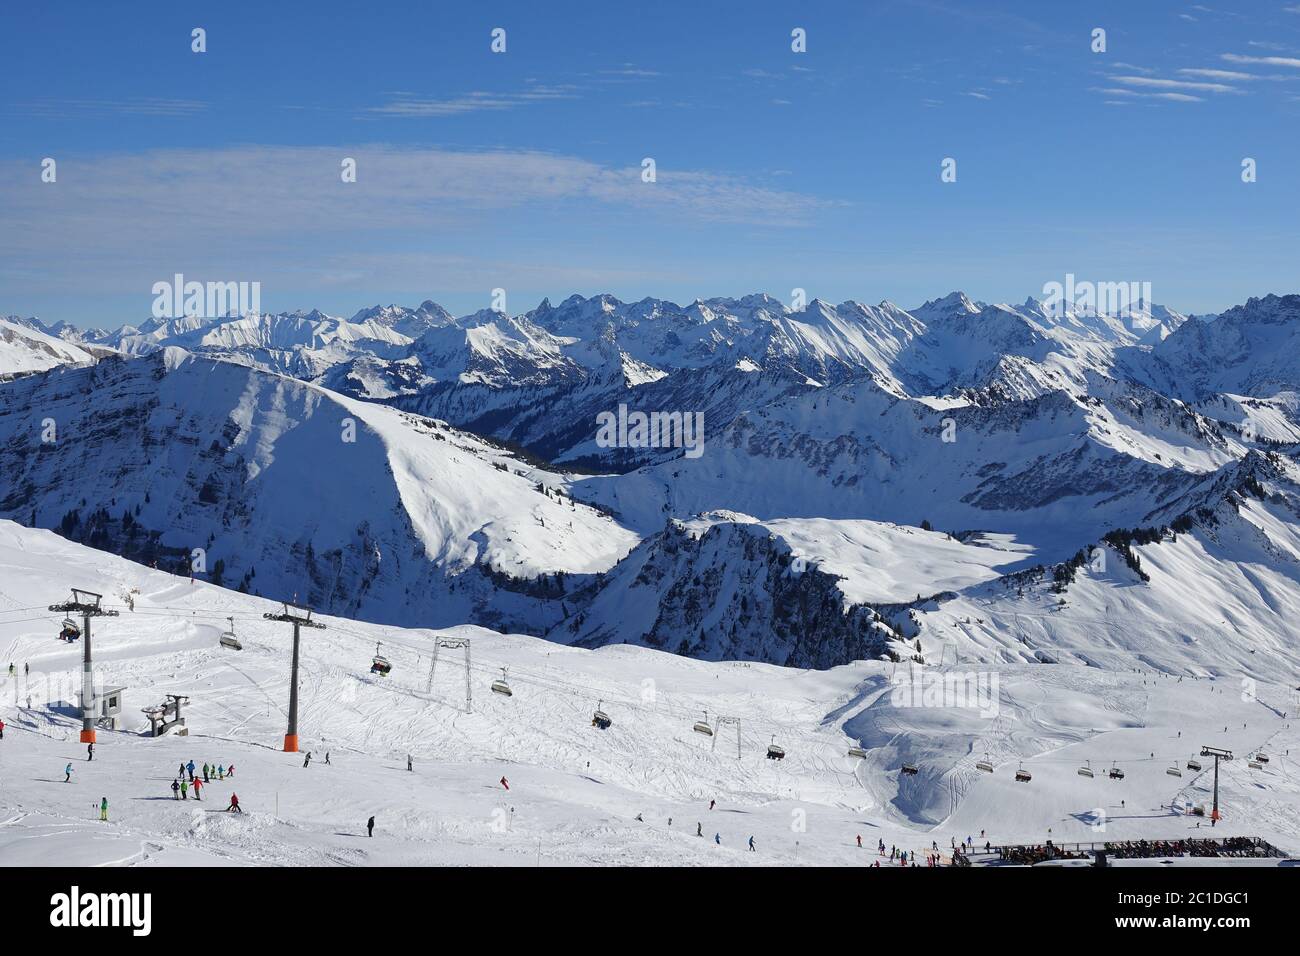 Ski slopes in the snowy mountains of the Bregenz Forest in Austria. Stock Photo